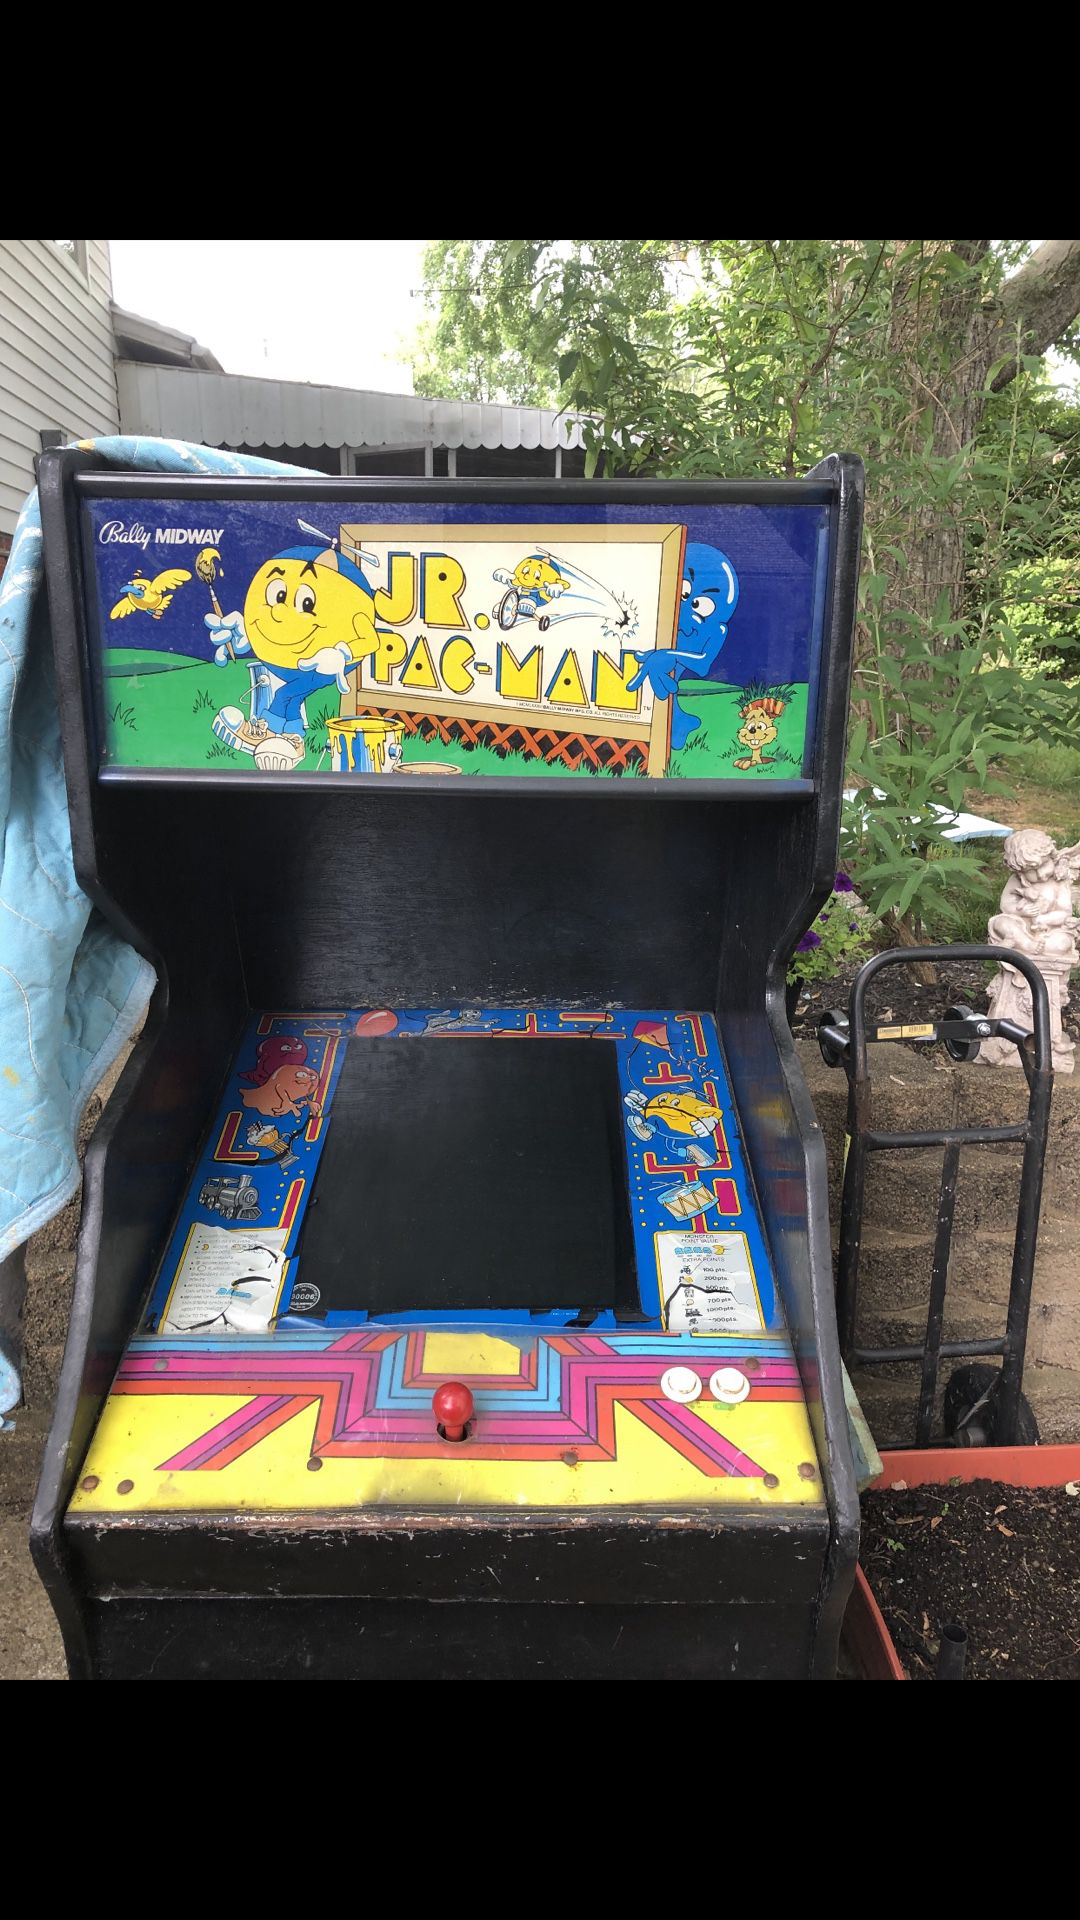 Jr Pac-Man and Ms. Pac-Man 2 in 1 arcade game